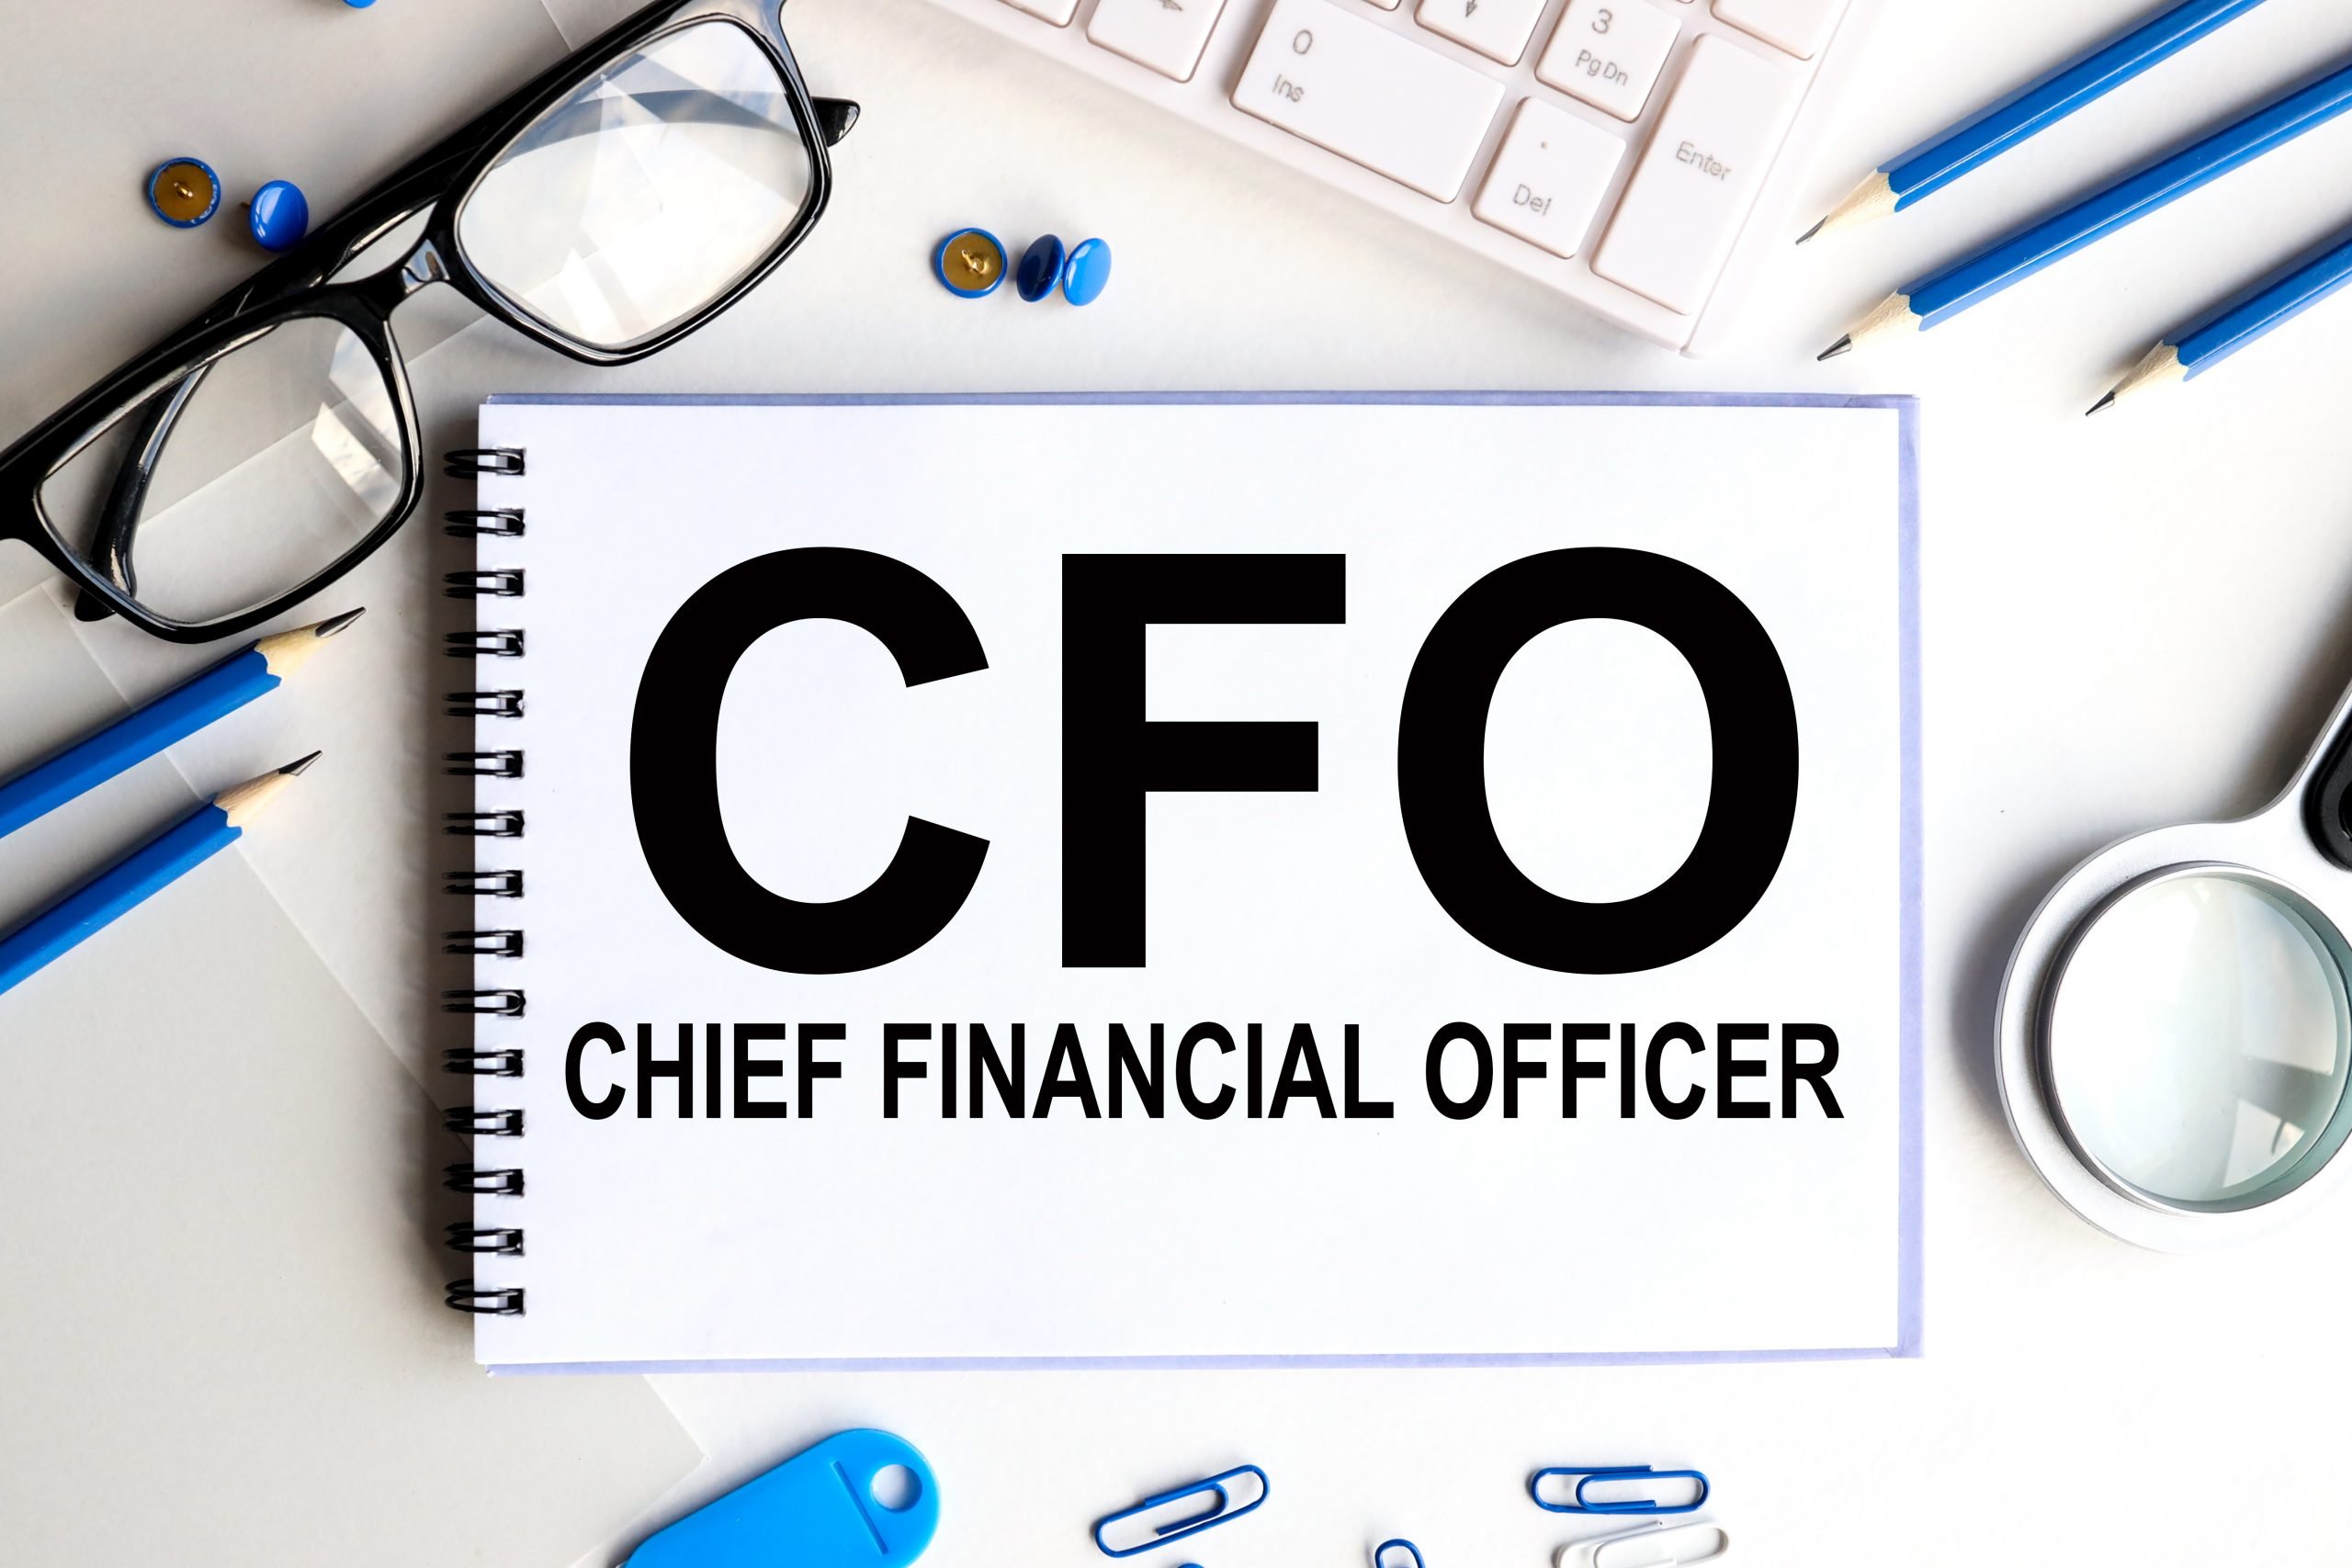 How to hire a CFO for a mobile game studio